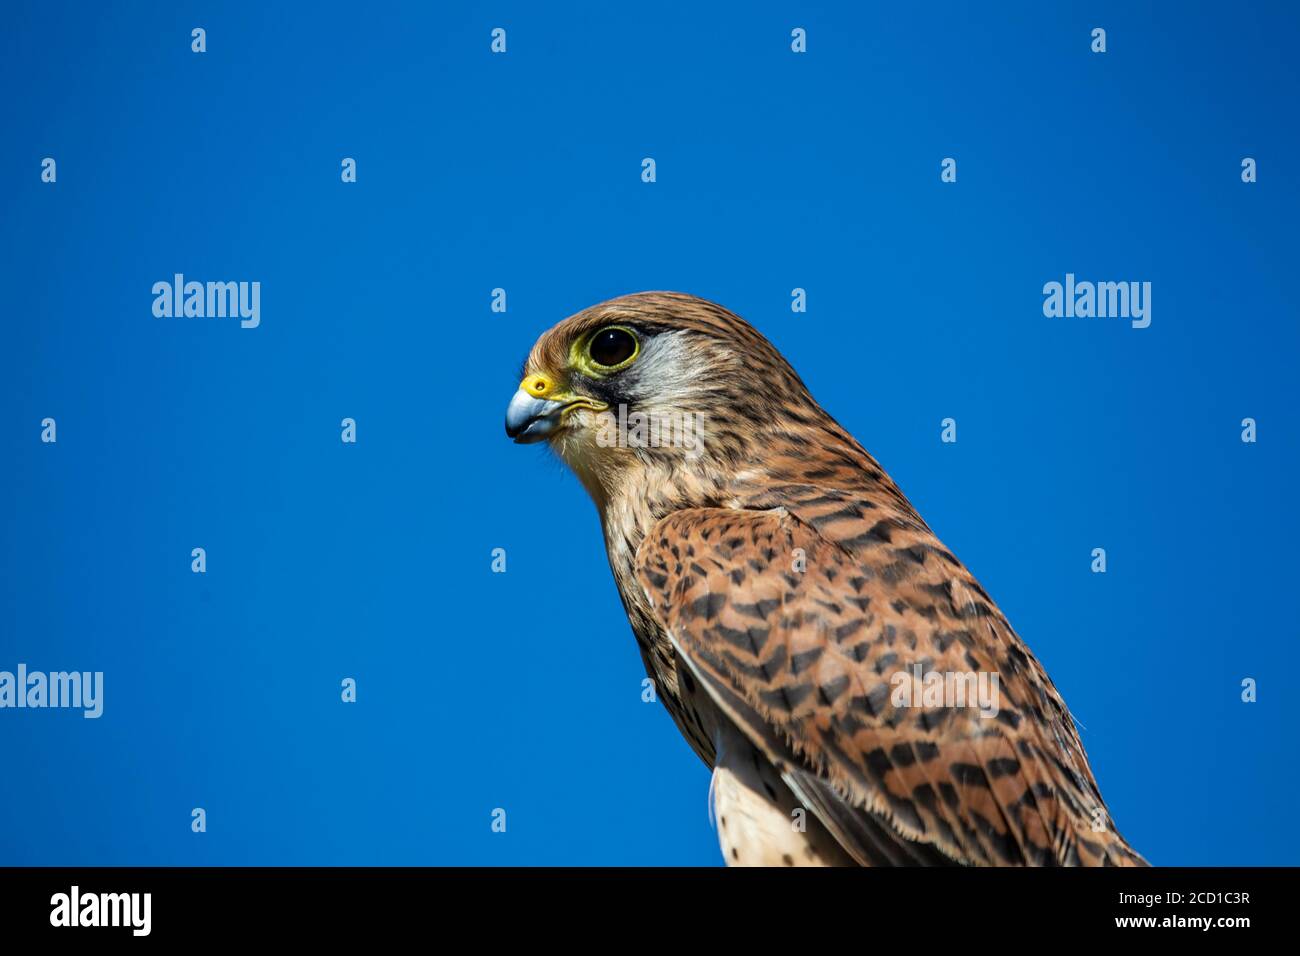 Close up of a Common Kestrel Falco tinnunculus (captive) showing spotted reddish brown plumage against a clear blue sky Stock Photo